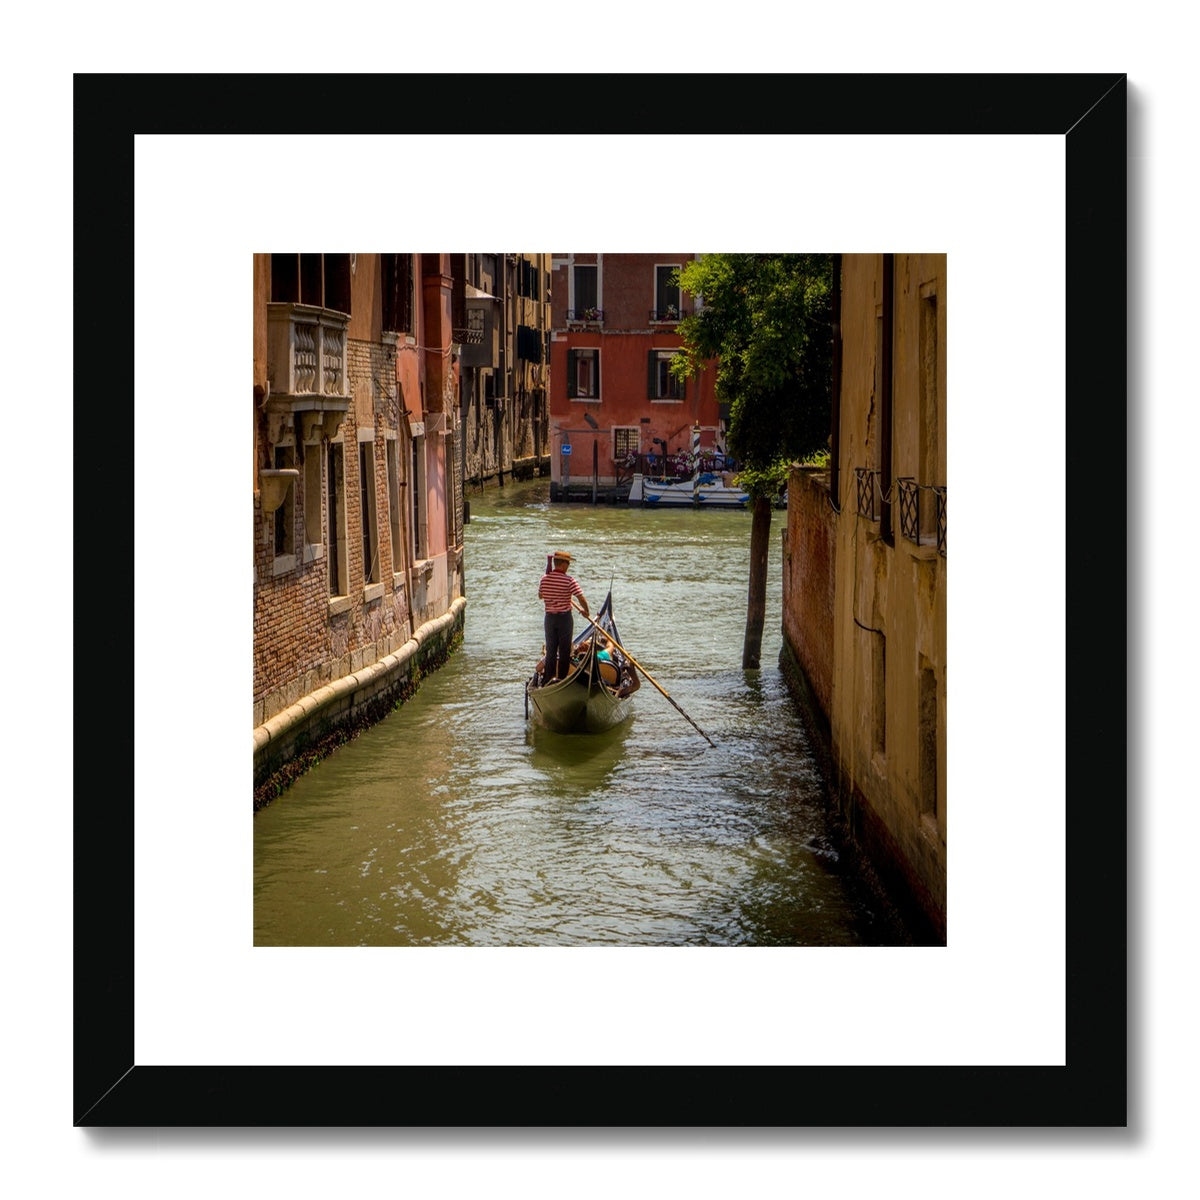 Gondola with gondolier wearing a traditional boater hat and striped top on a  canal in Venice. Italy. Framed & Mounted Print